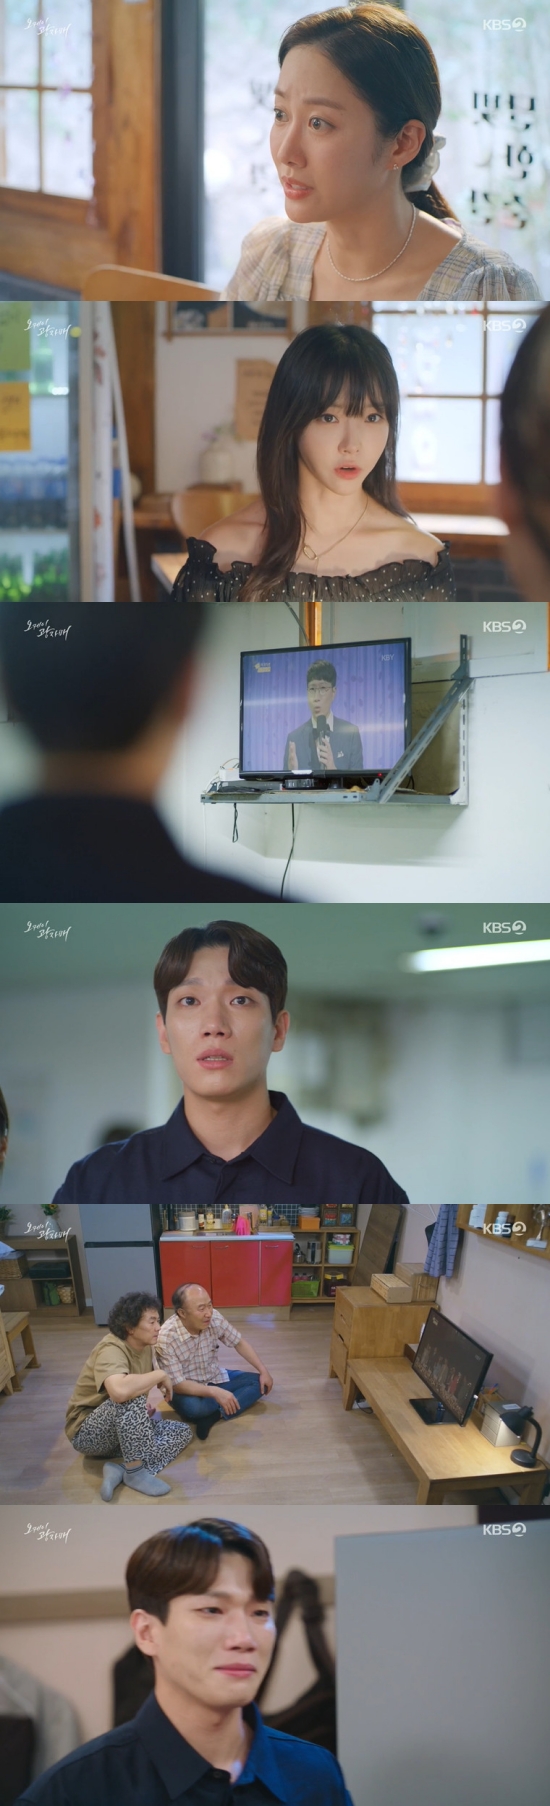 In the 44th KBS 2TV weekend drama OK Photon broadcasted on the 28th, the repechage stage of Han Ye-seul (Kim Kyung-nam) was shown on the air.On this day, Han Ye-seul participated in Repechage after hesitation, and confessed his life history with tears.Han Ye-seul sang at his best but was eliminated from Repechage.Han Ye-seul then told Lee Kwang-sik, Thank you, for letting me stand on stage for the last time.Han Ye-seul found the house of Handolse (Lee Byung-joon), and expressed bitterness, saying, I guess I wasnt a bamboo tree. Handolse was overwhelmed, saying, Im rooting feverishly.But Lee Kwang-sik gathered at the restaurant with Yang Dae-chang (Kum Ho-seok), Lee Tae-ri (Cheon I-sul). Lee Kwang-sik said, I cant let you be a star like this. Im not giving up.I do not know the world yet, but I believe that I will know someday. Lee Tae-ri said, I will not be able to give up because I am working hard in fan clubs. Lee Kwang-sik said, When I go up the hill, I can feel the power of someone who touches me. Lets be such a strength. Han Ye-seul decided to help him prepare for the audition again.In particular, Repechage was broadcast, and Han Ye-seul was contacted by Yang Dae-chang and confirmed the broadcast.On TV, Han Ye-seuls stage was revealed, and MC said, Although I was eliminated from Repechage, I am impressed by all the judges.Han Ye-seul, he explained.In addition, Byun Sachae (Ko Geon-han) revealed the Identity of Kim (Jeong Seung-ho) to Heo Gi-jin (Seol Jung-hwan). He met Kim and handed him an envelope containing a million won.He said he would prepare 100 million won and promised, I think it will be ready by 12:00 tomorrow.Heo followed Kim and Kim headed to the gambling house. He said, A heart disease patient? How can this be? Does this make sense?Kim said, If my father is hard, it is natural for my child to help.I am so sorry that I gave you a few dollars. Huh Gi-jin said, Does it make sense to use this way as a child who can not raise a child and throws it away?It is a lie to you that you want to hear your father once. Madness was not a child, but a blackmail bait to tear out money. Heo Gi-jin warned him not to show up before him, and Kim called Lee Kwang-tae, who eventually made a Body Fight to dry Kim, saying, Do not touch the clown.Im not going to let it go, he nailed.Photo = KBS Broadcasting Screen